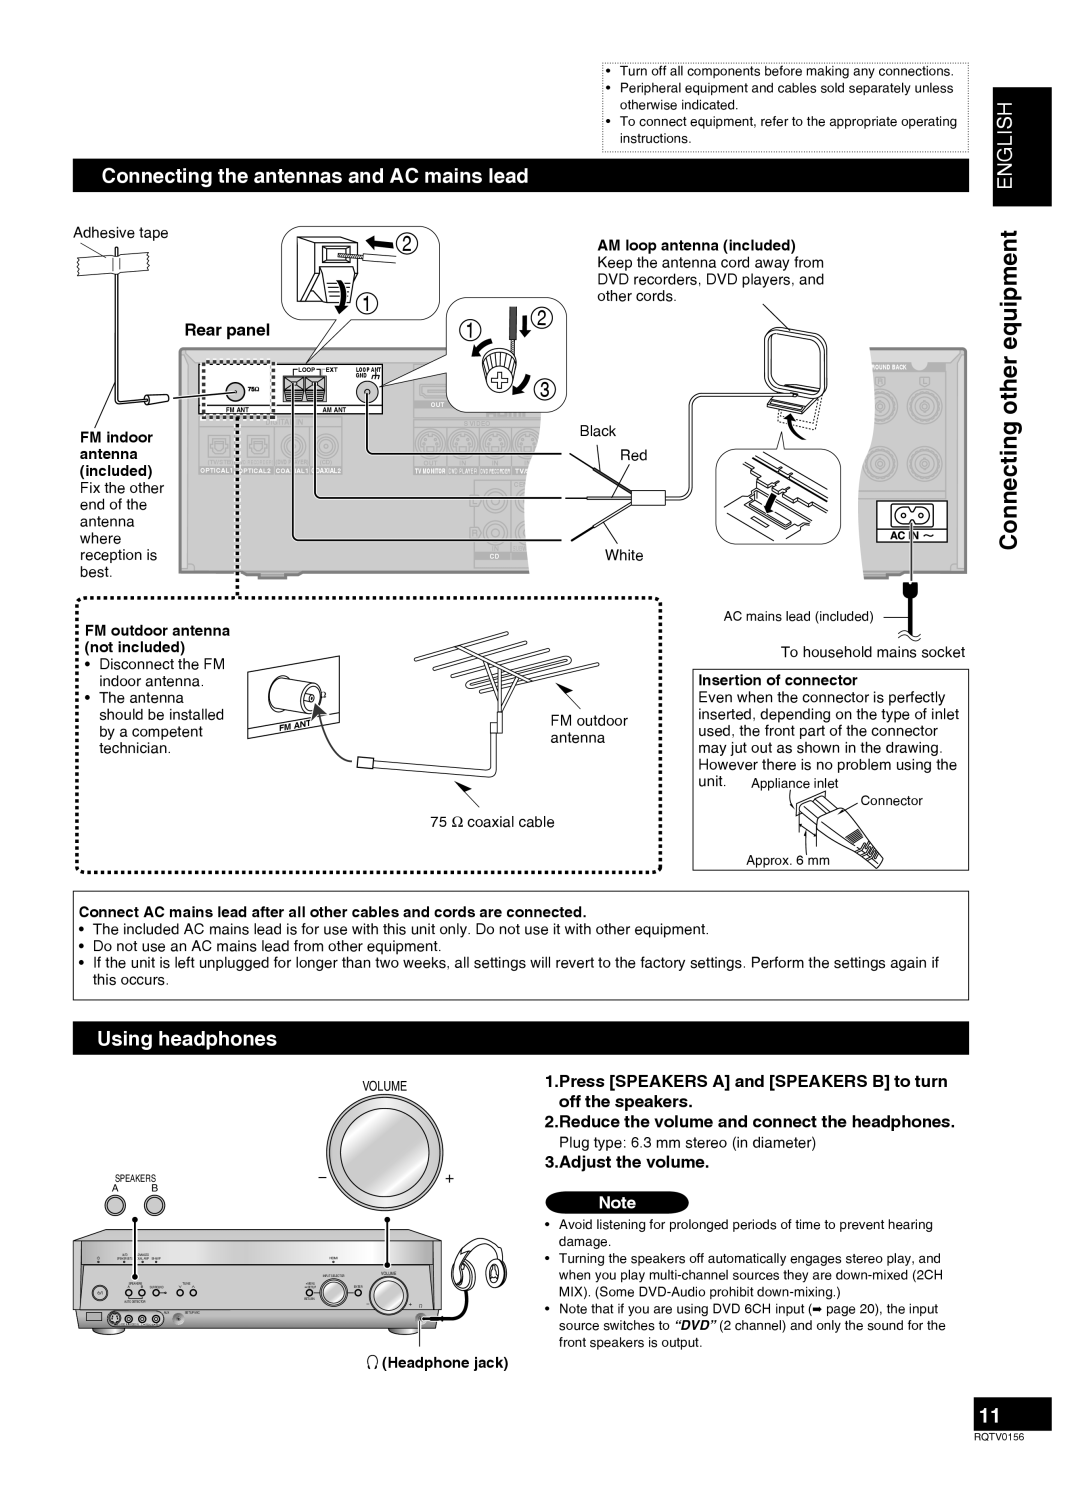 Panasonic SA-XR58 manual equipment, Connecting other, Connecting the antennas and AC mains lead, English, BlackVIDEO 